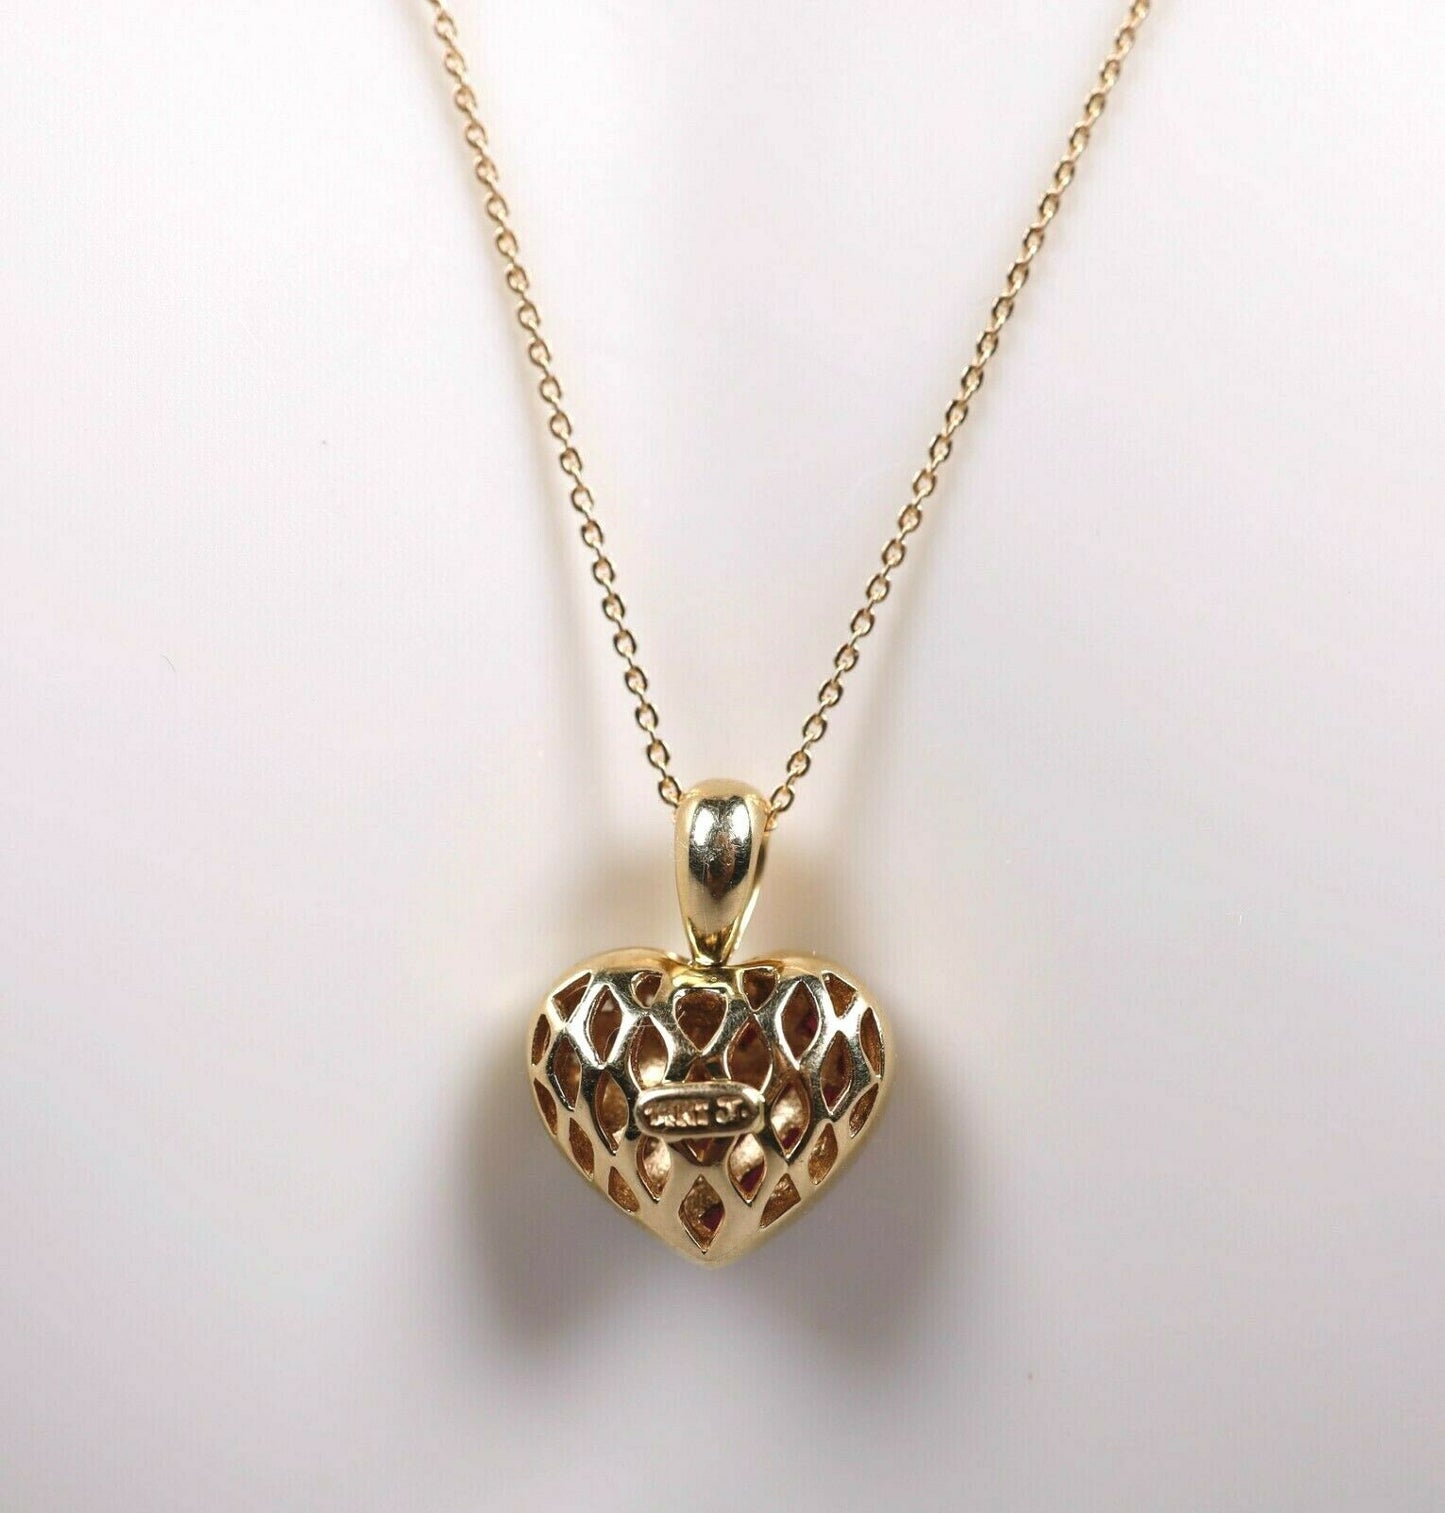 NEW 14k Yellow Gold Heart Shaped Pendant Necklace with Rubies & Diamonds, 18 inches - 3.3g